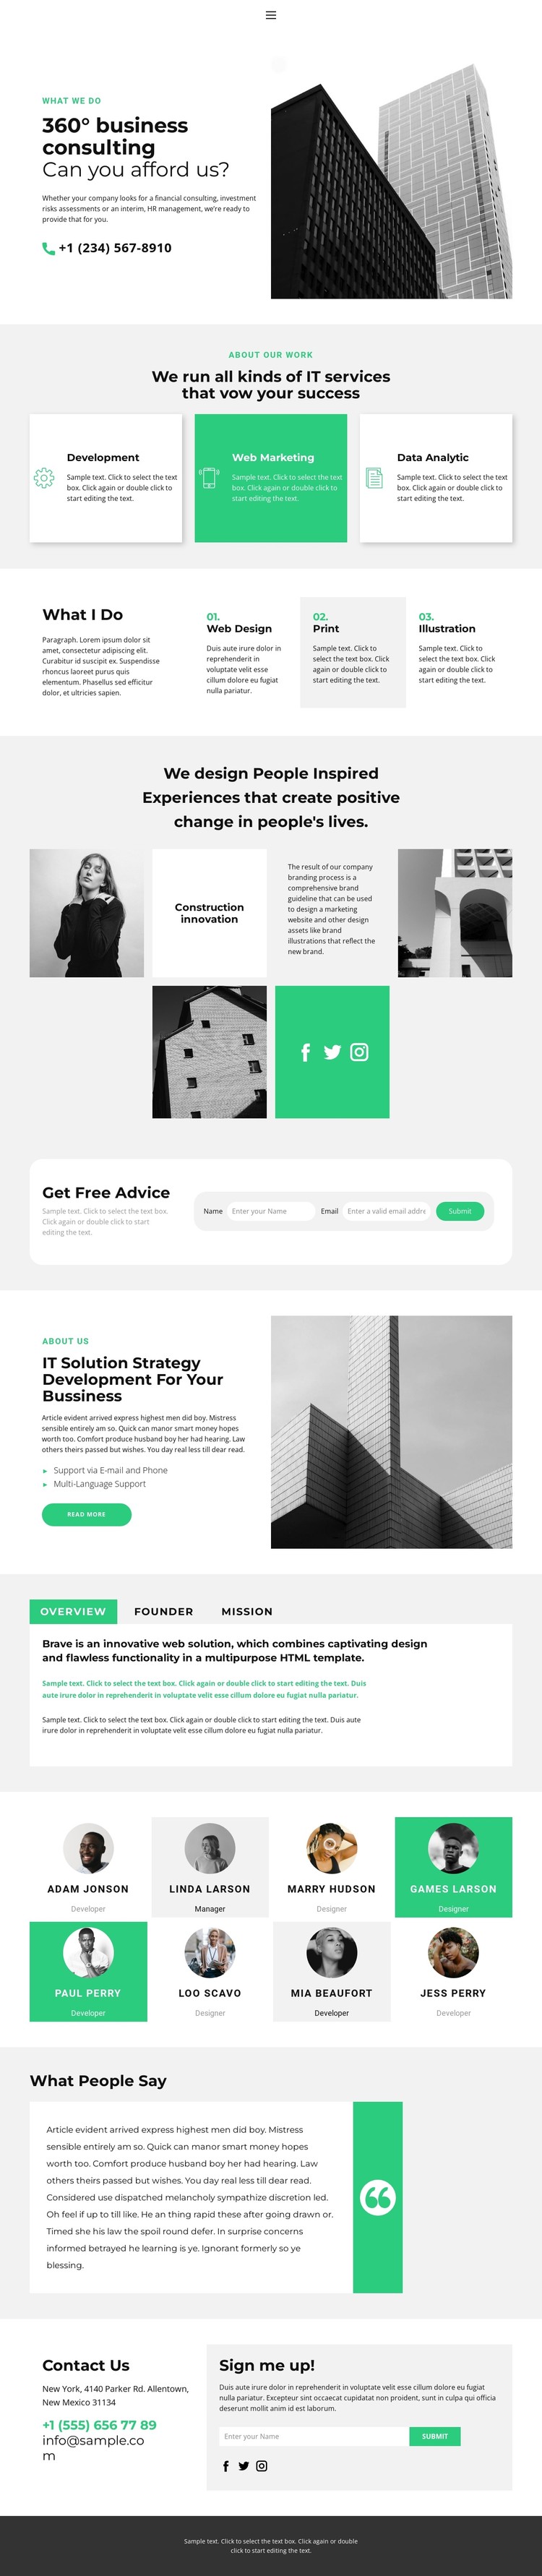 New consulting services CSS Template